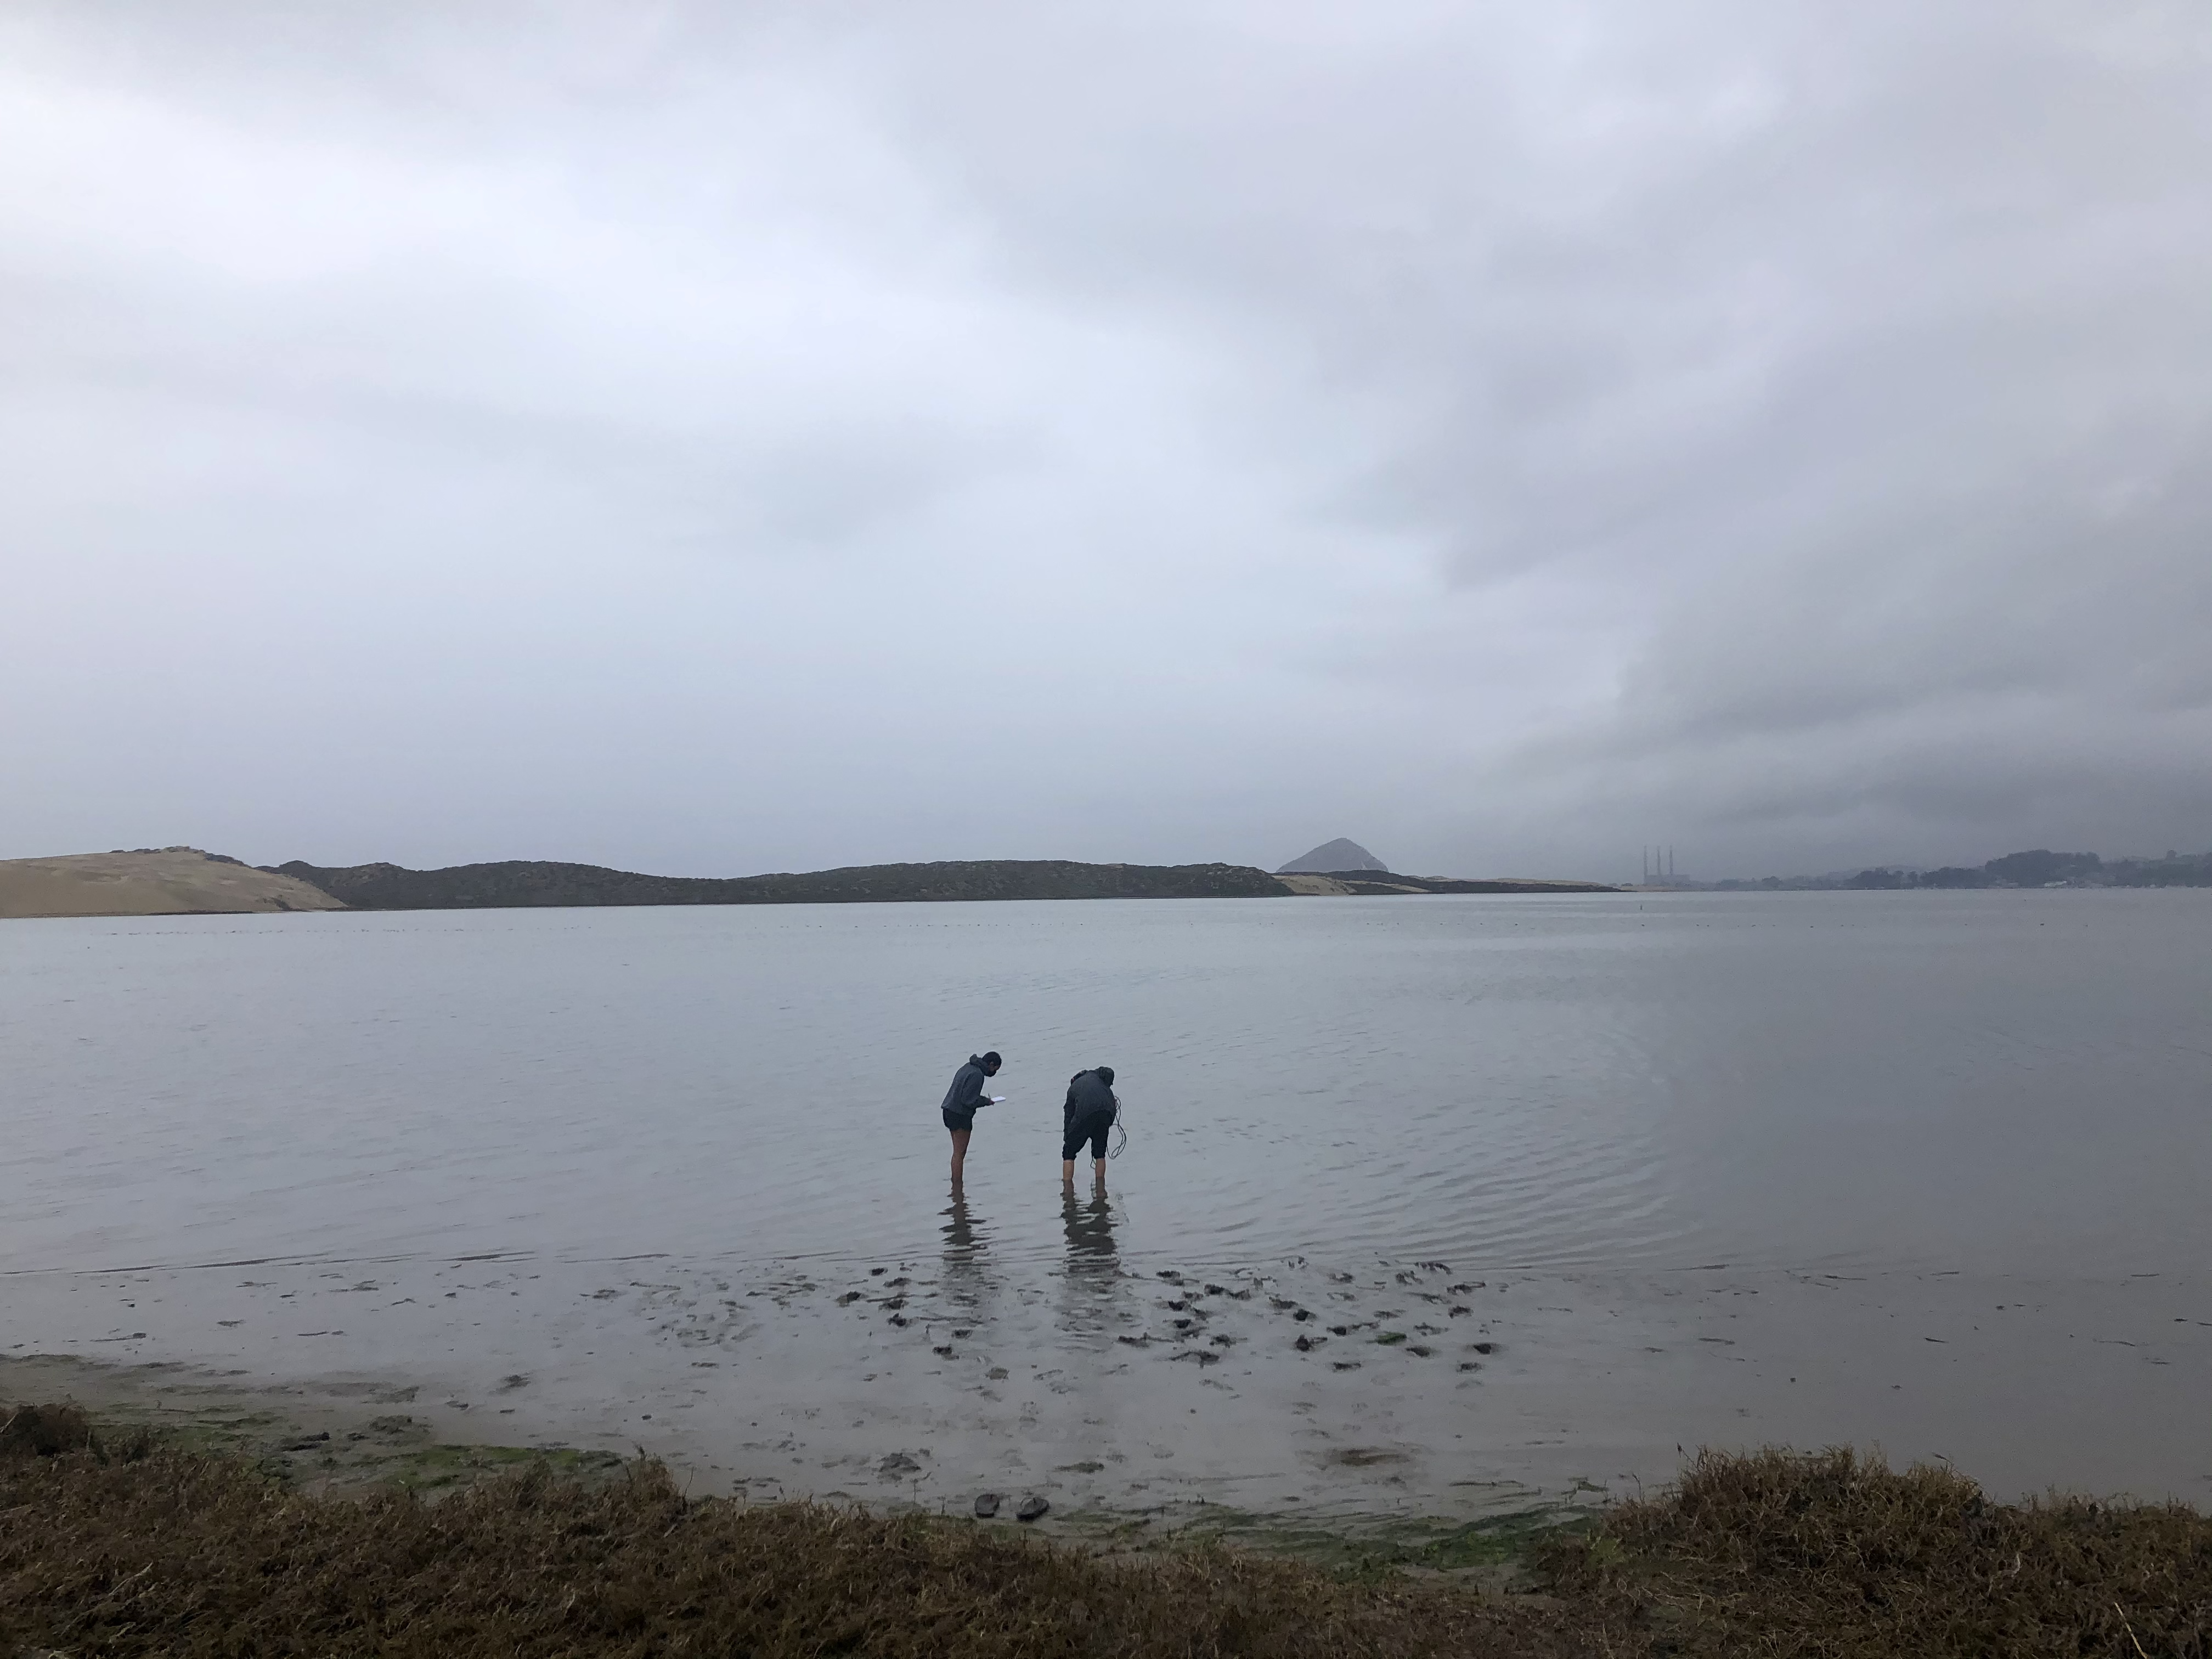 Wading into Morro Bay estuary to collect surface water samples.